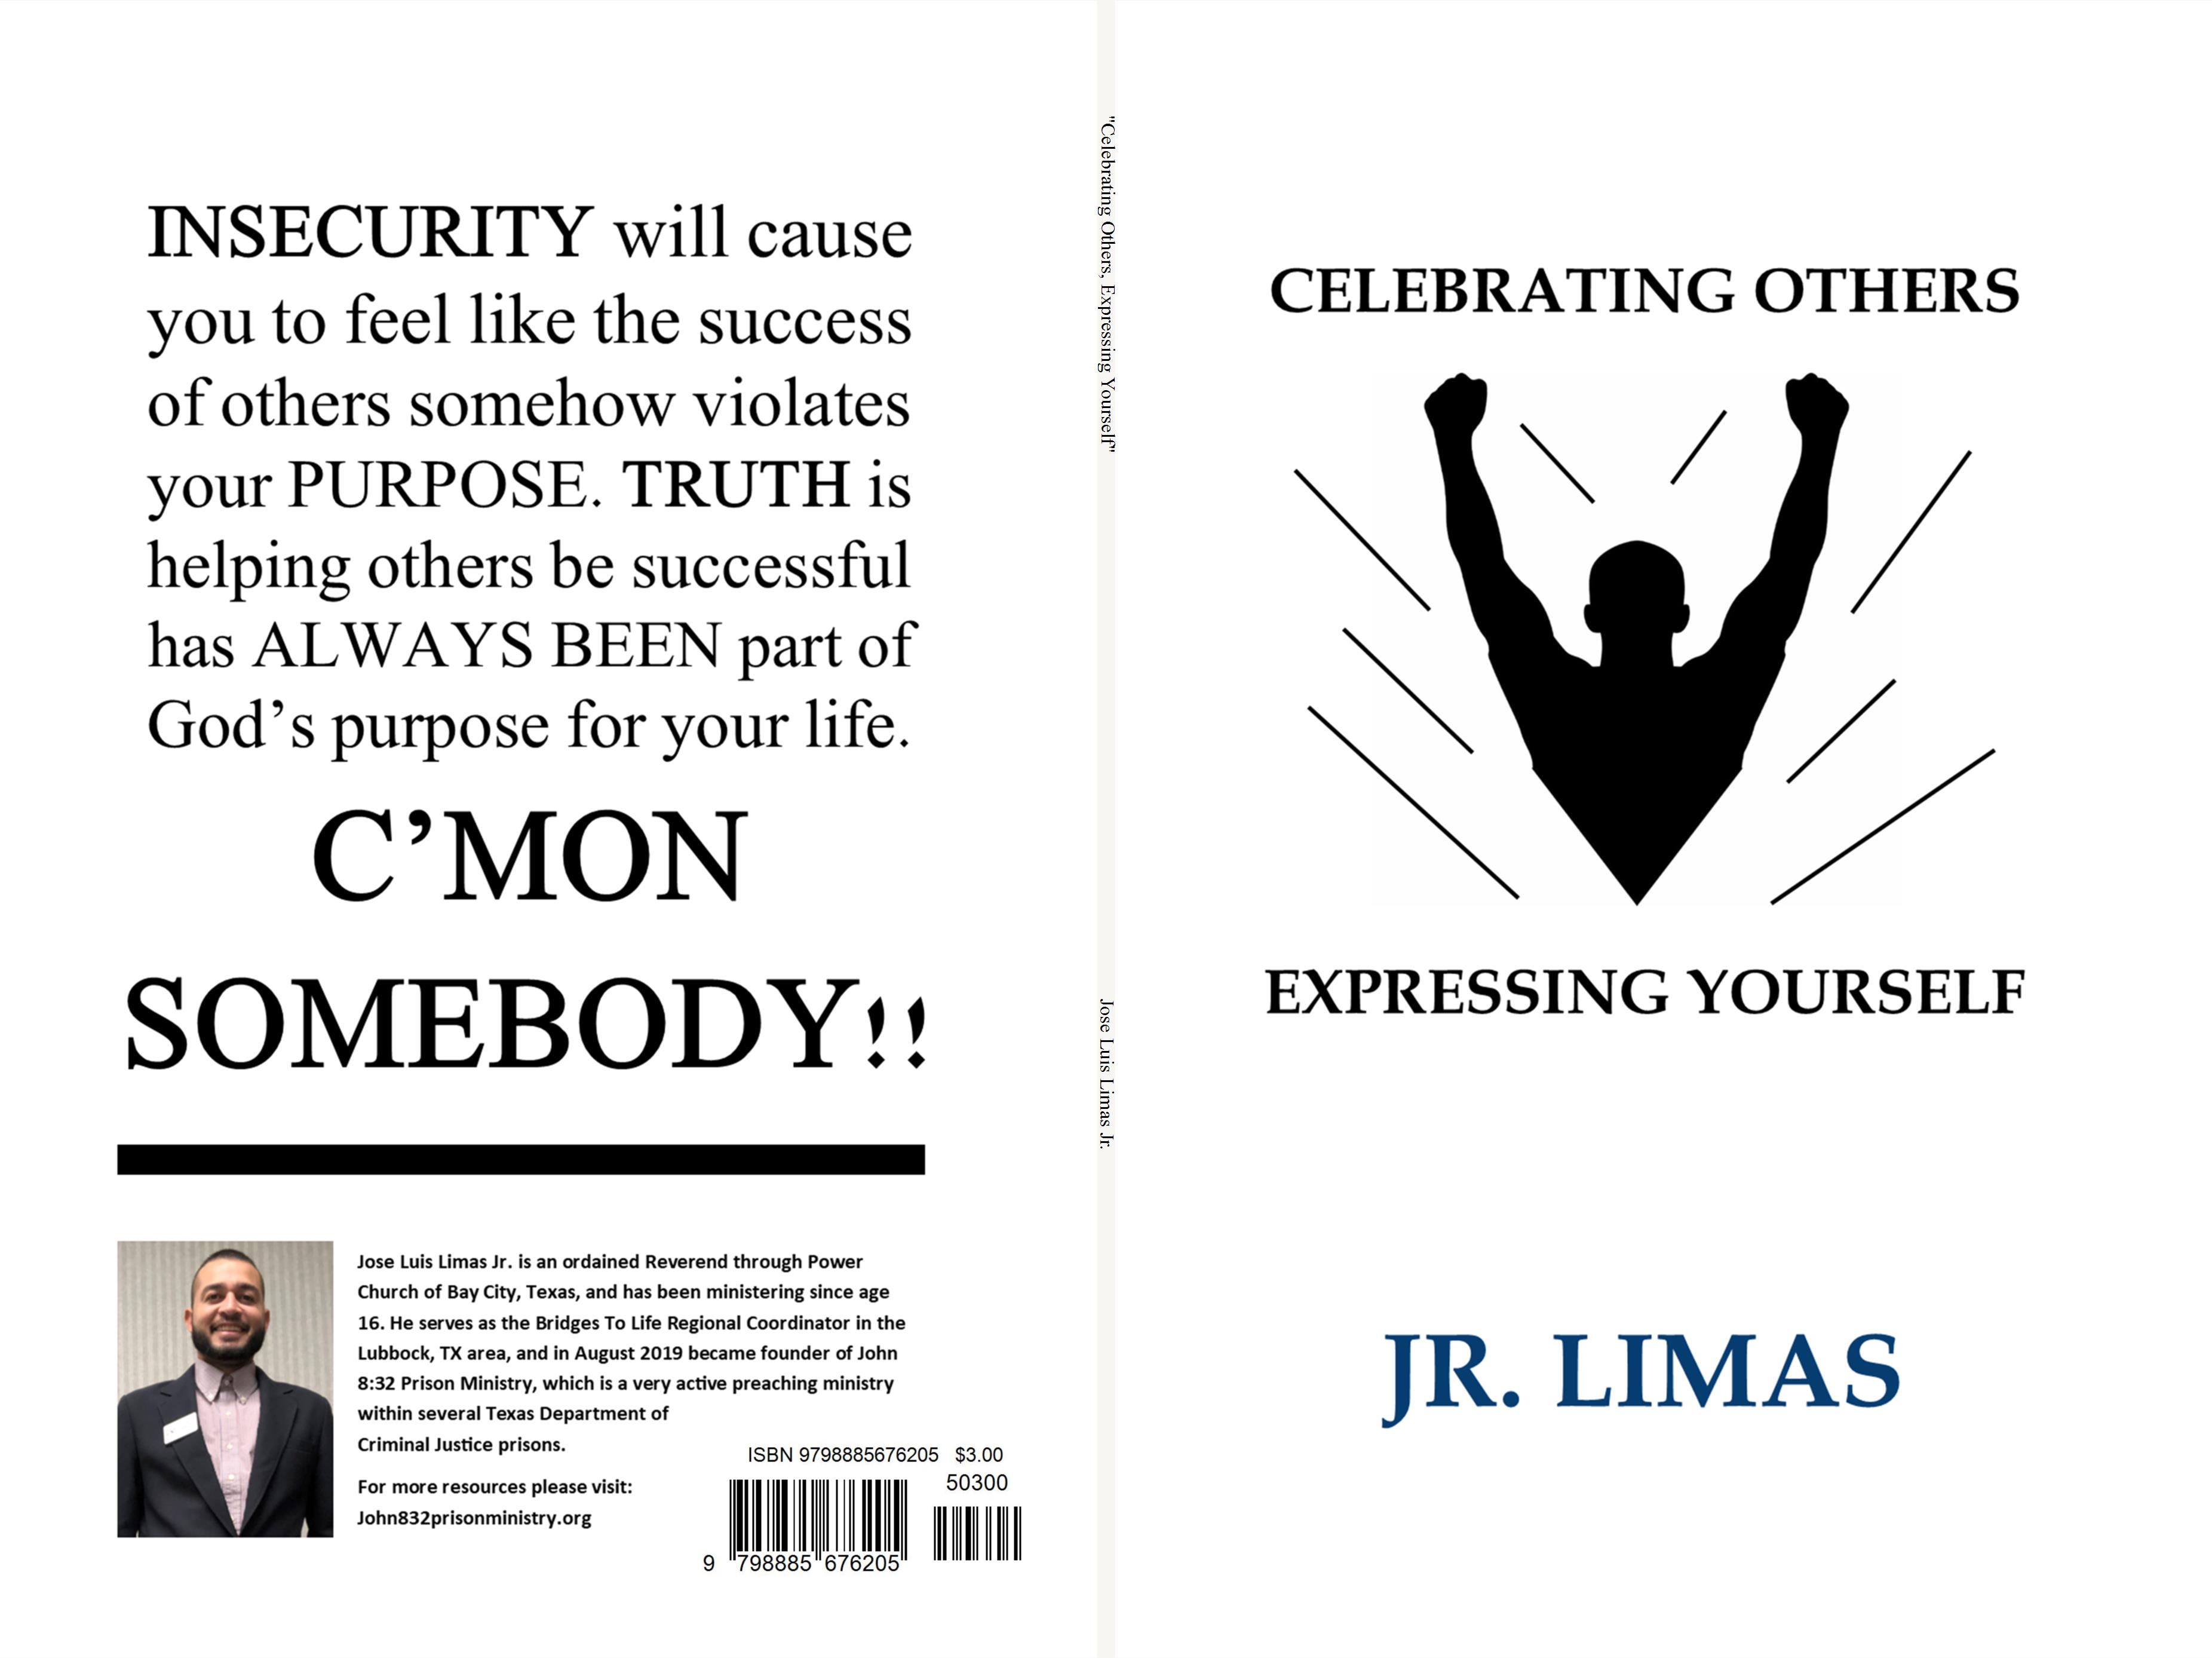 "Celebrating Others, Expressing Yourself" cover image